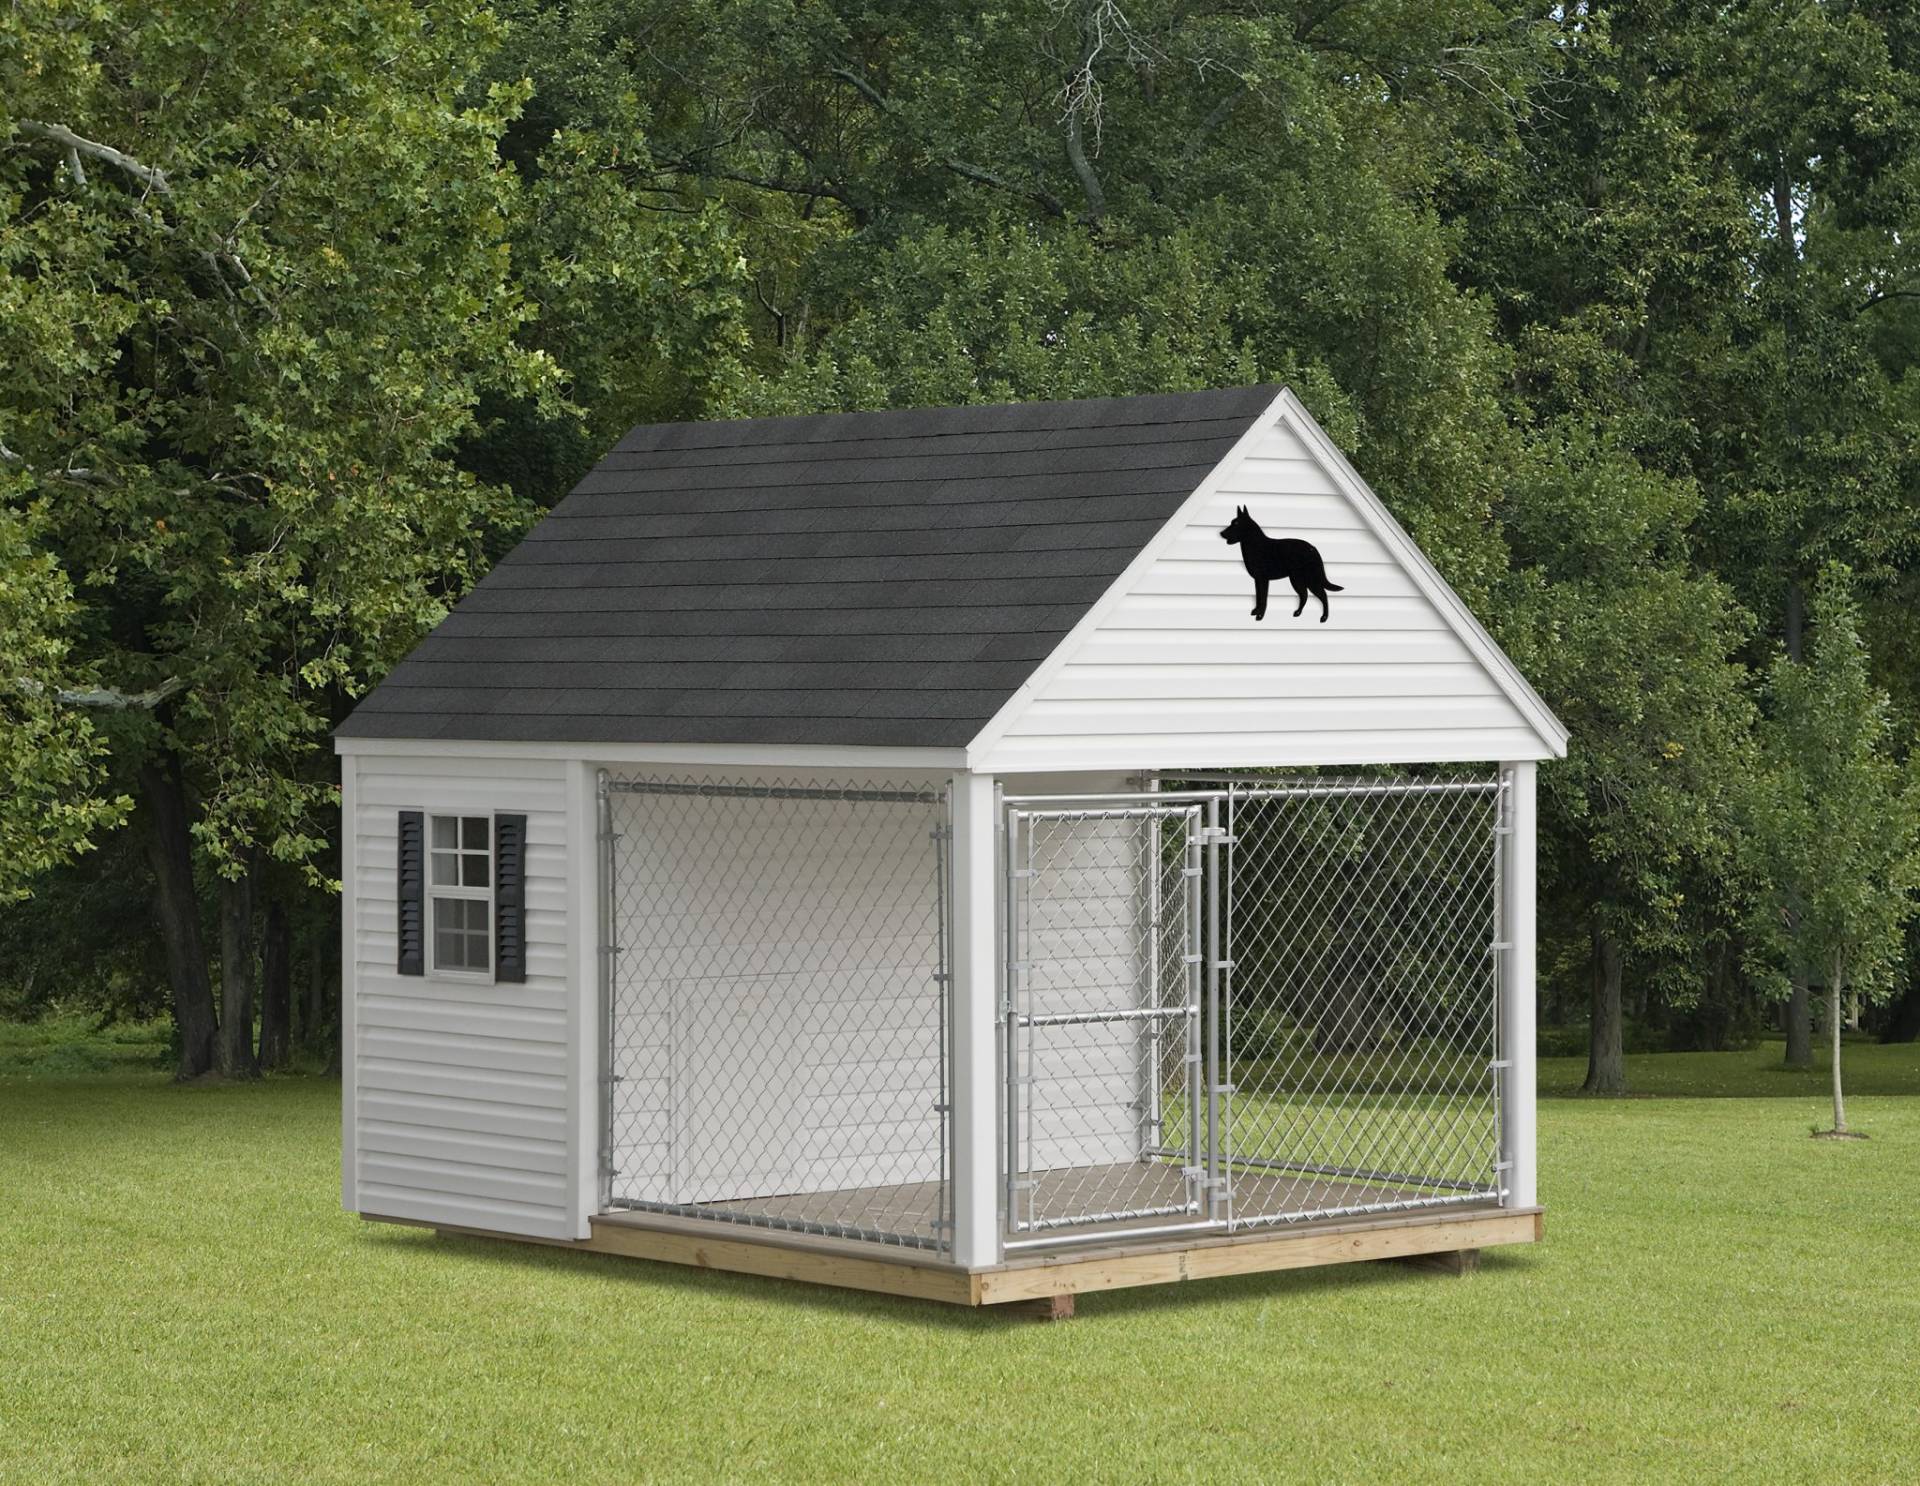 large outdoor dog kennel